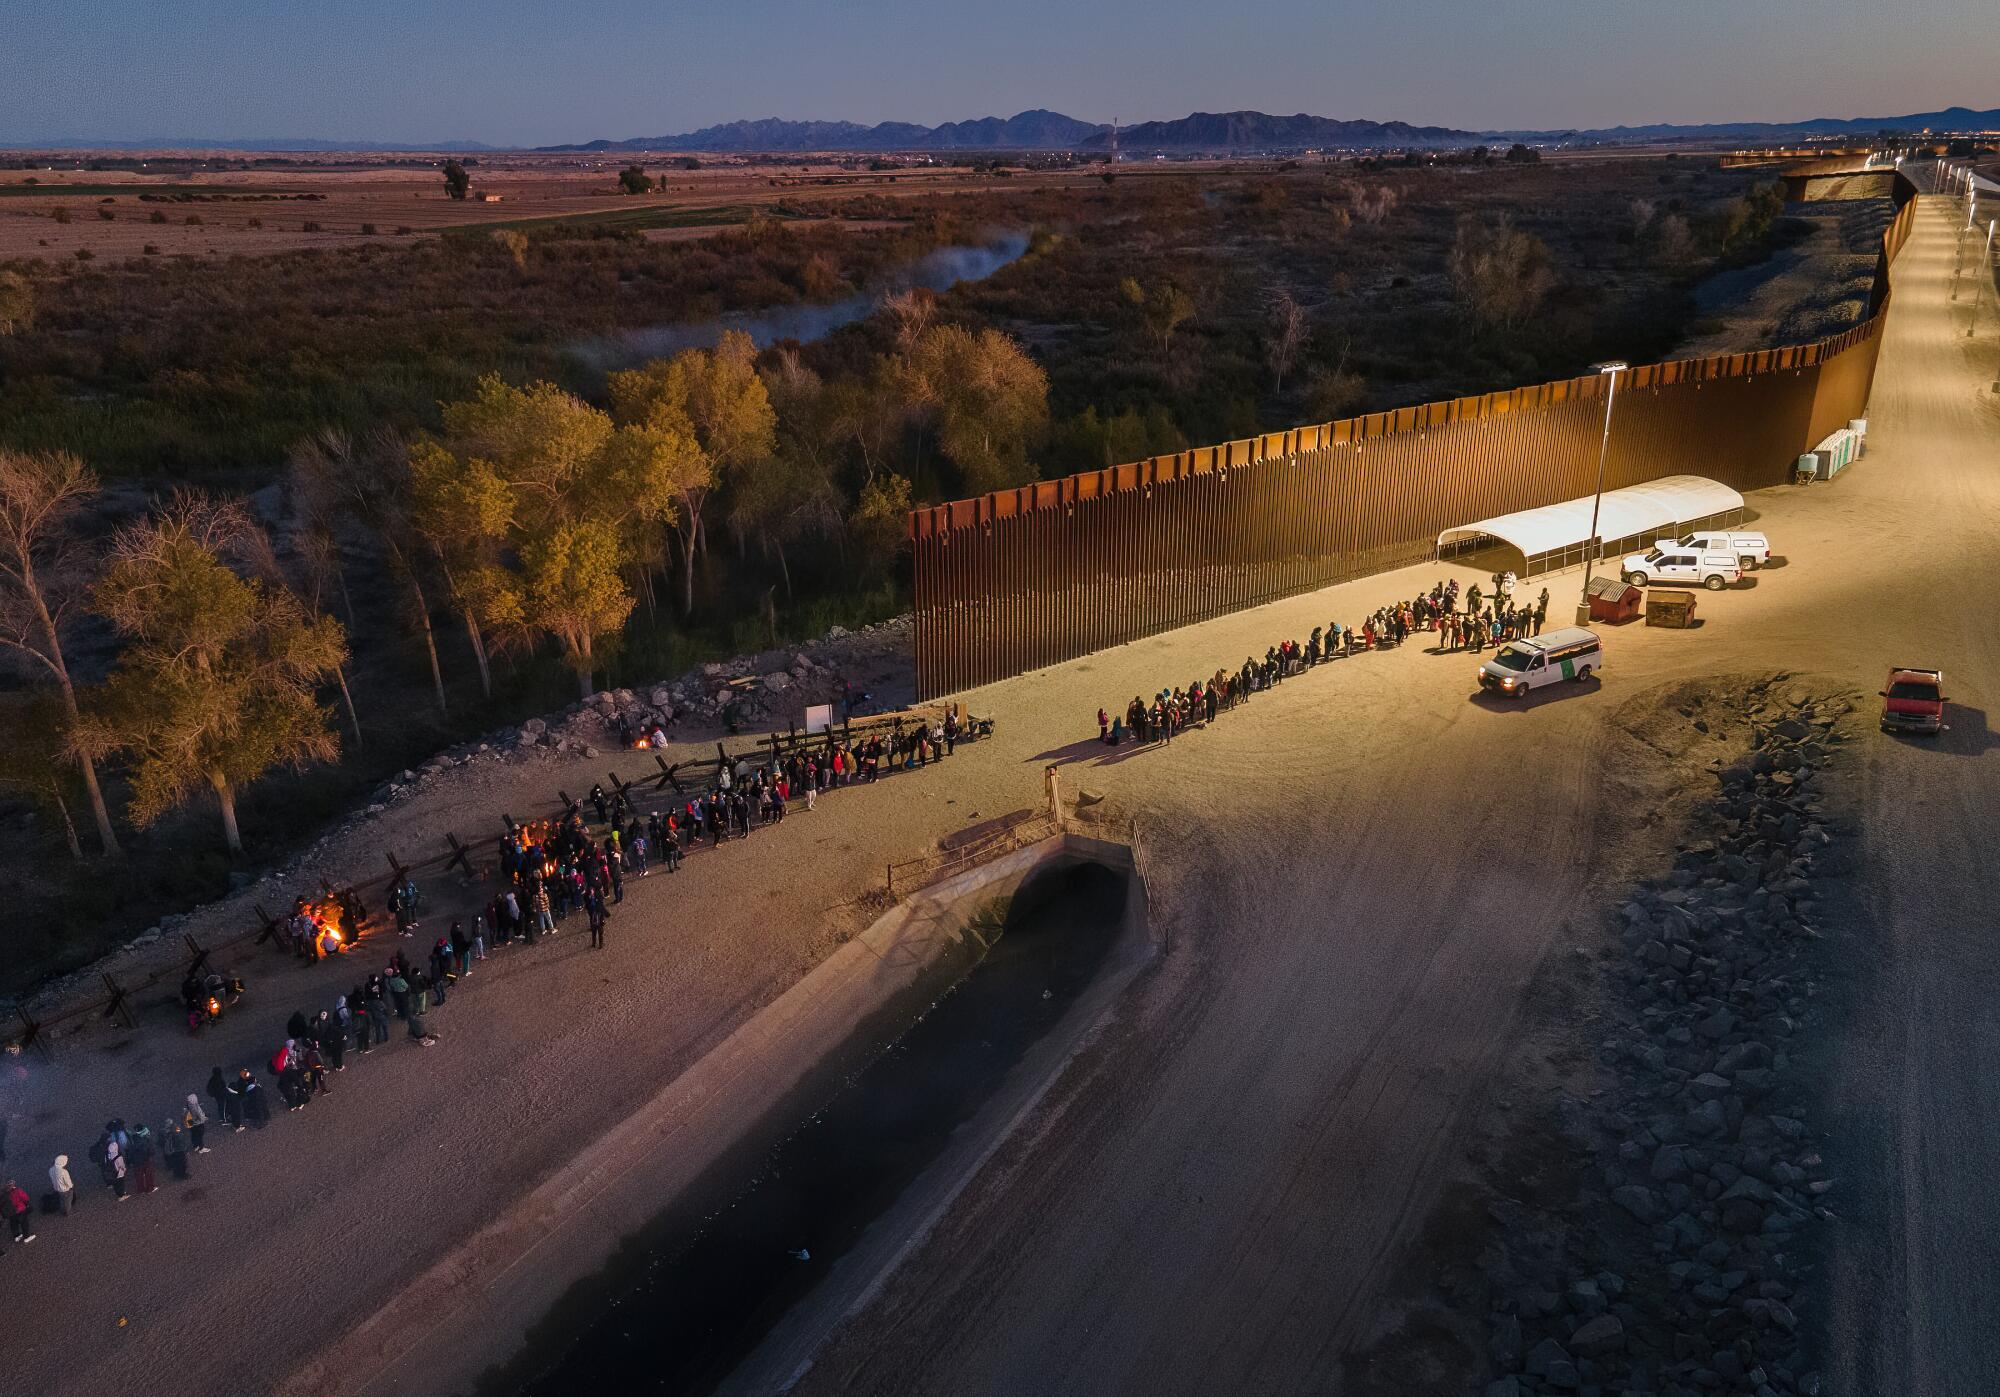 A group of 200 migrants wait in a long line to be processed by U.S. Border Patrol agents south of Yuma, Ariz.